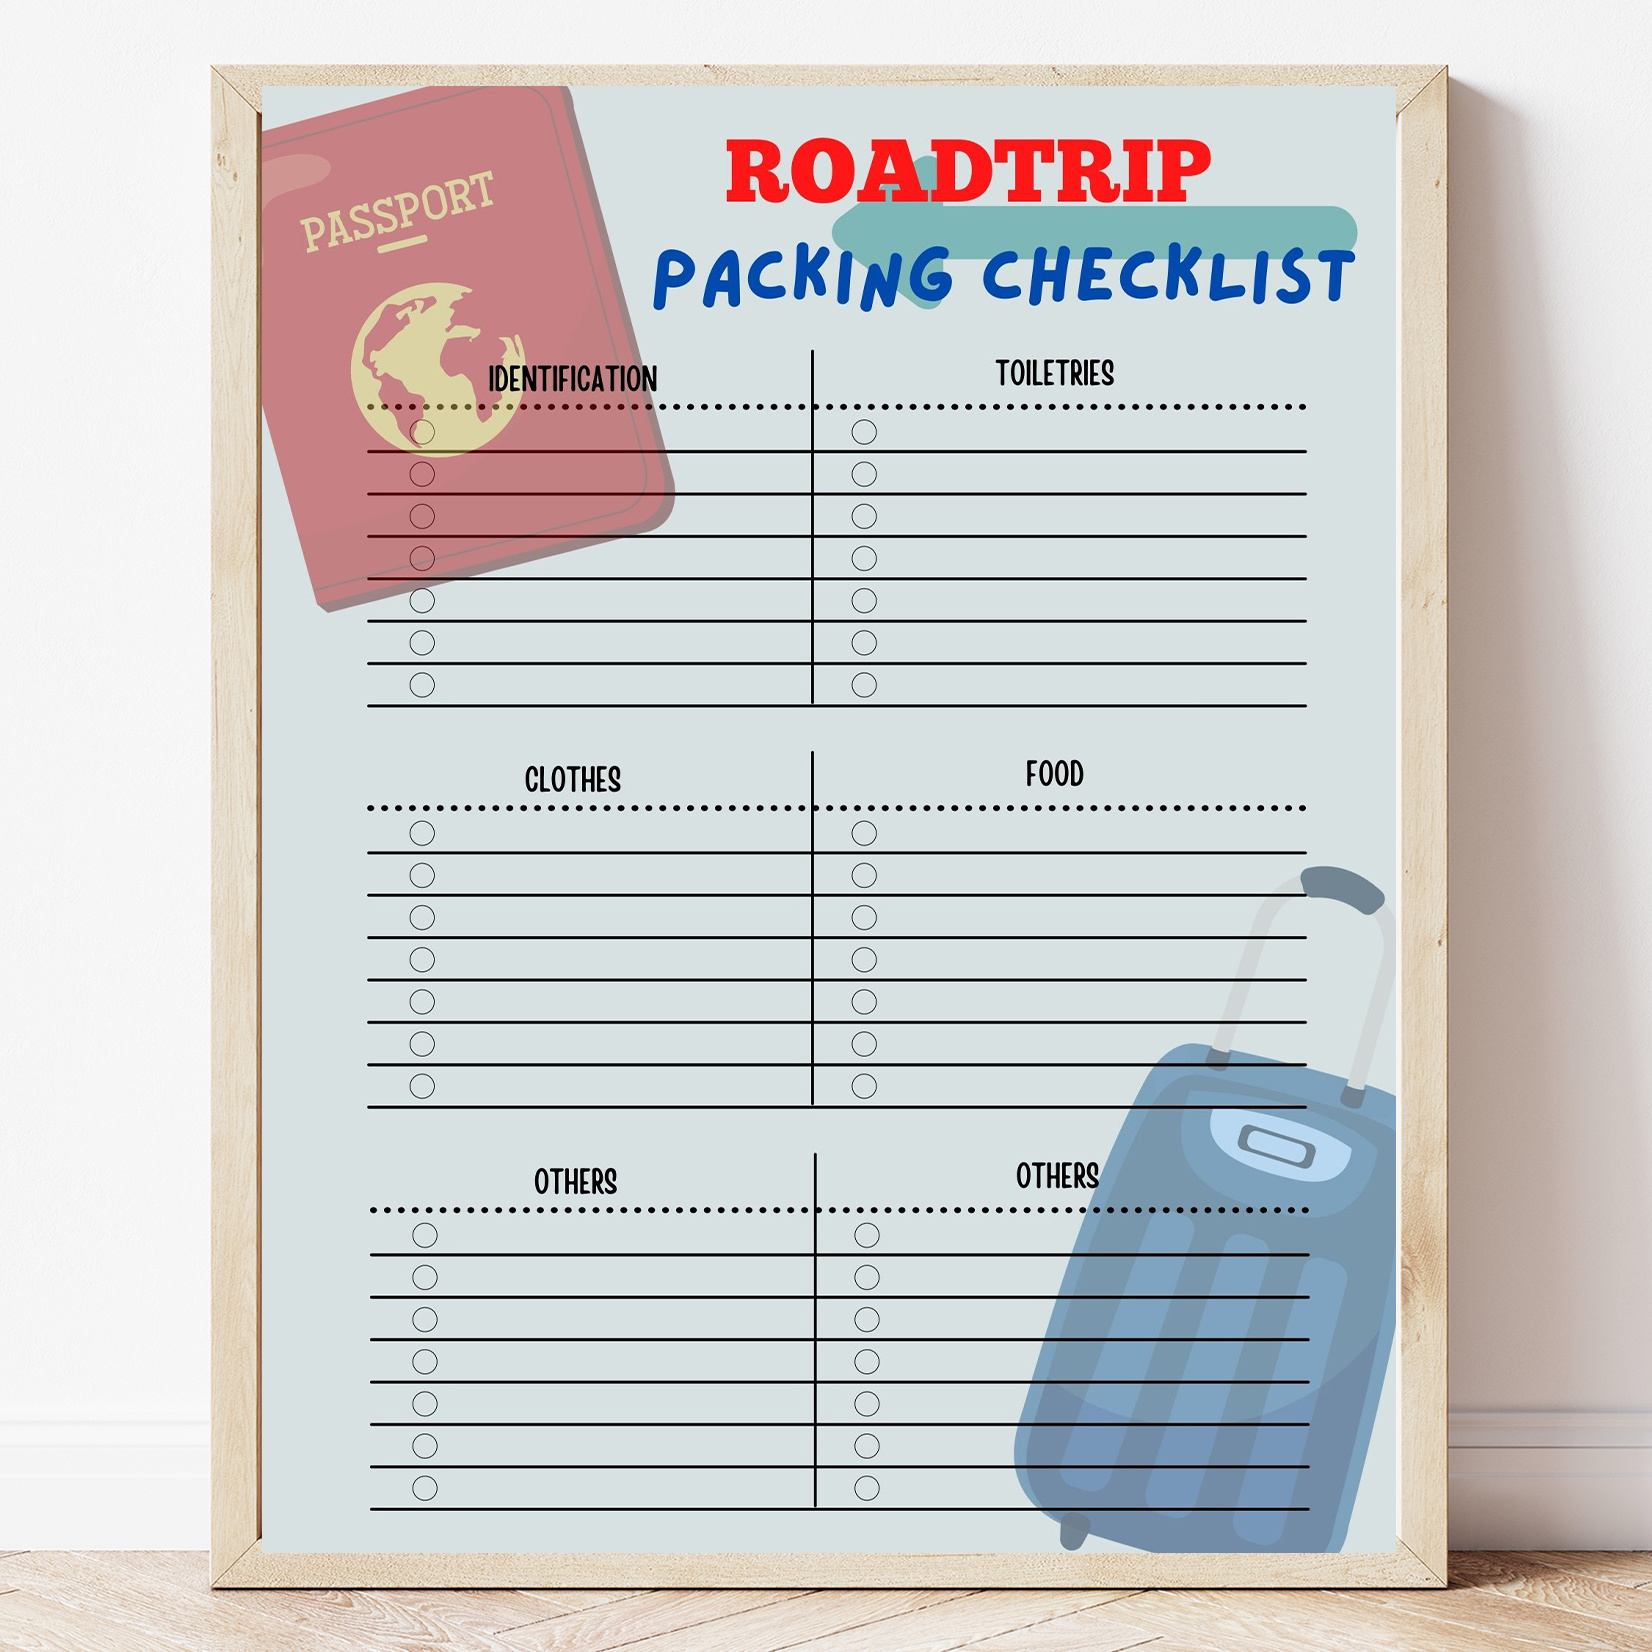 free college road trip planner